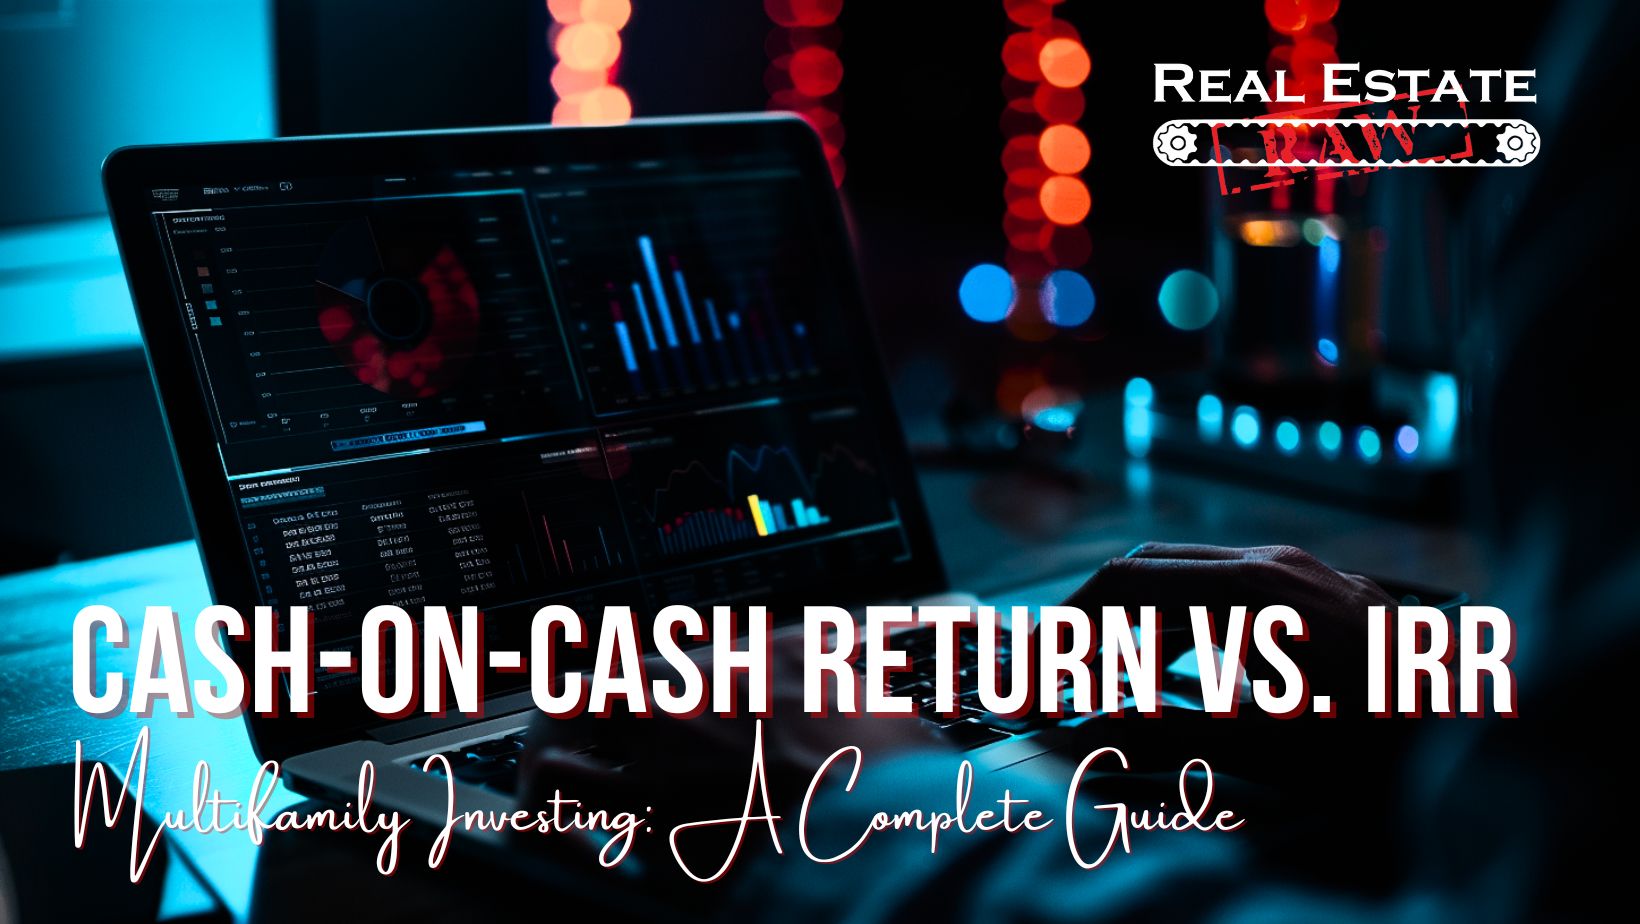 Cash-on-Cash Return vs. IRR for Multifamily Investing: A Complete Guide